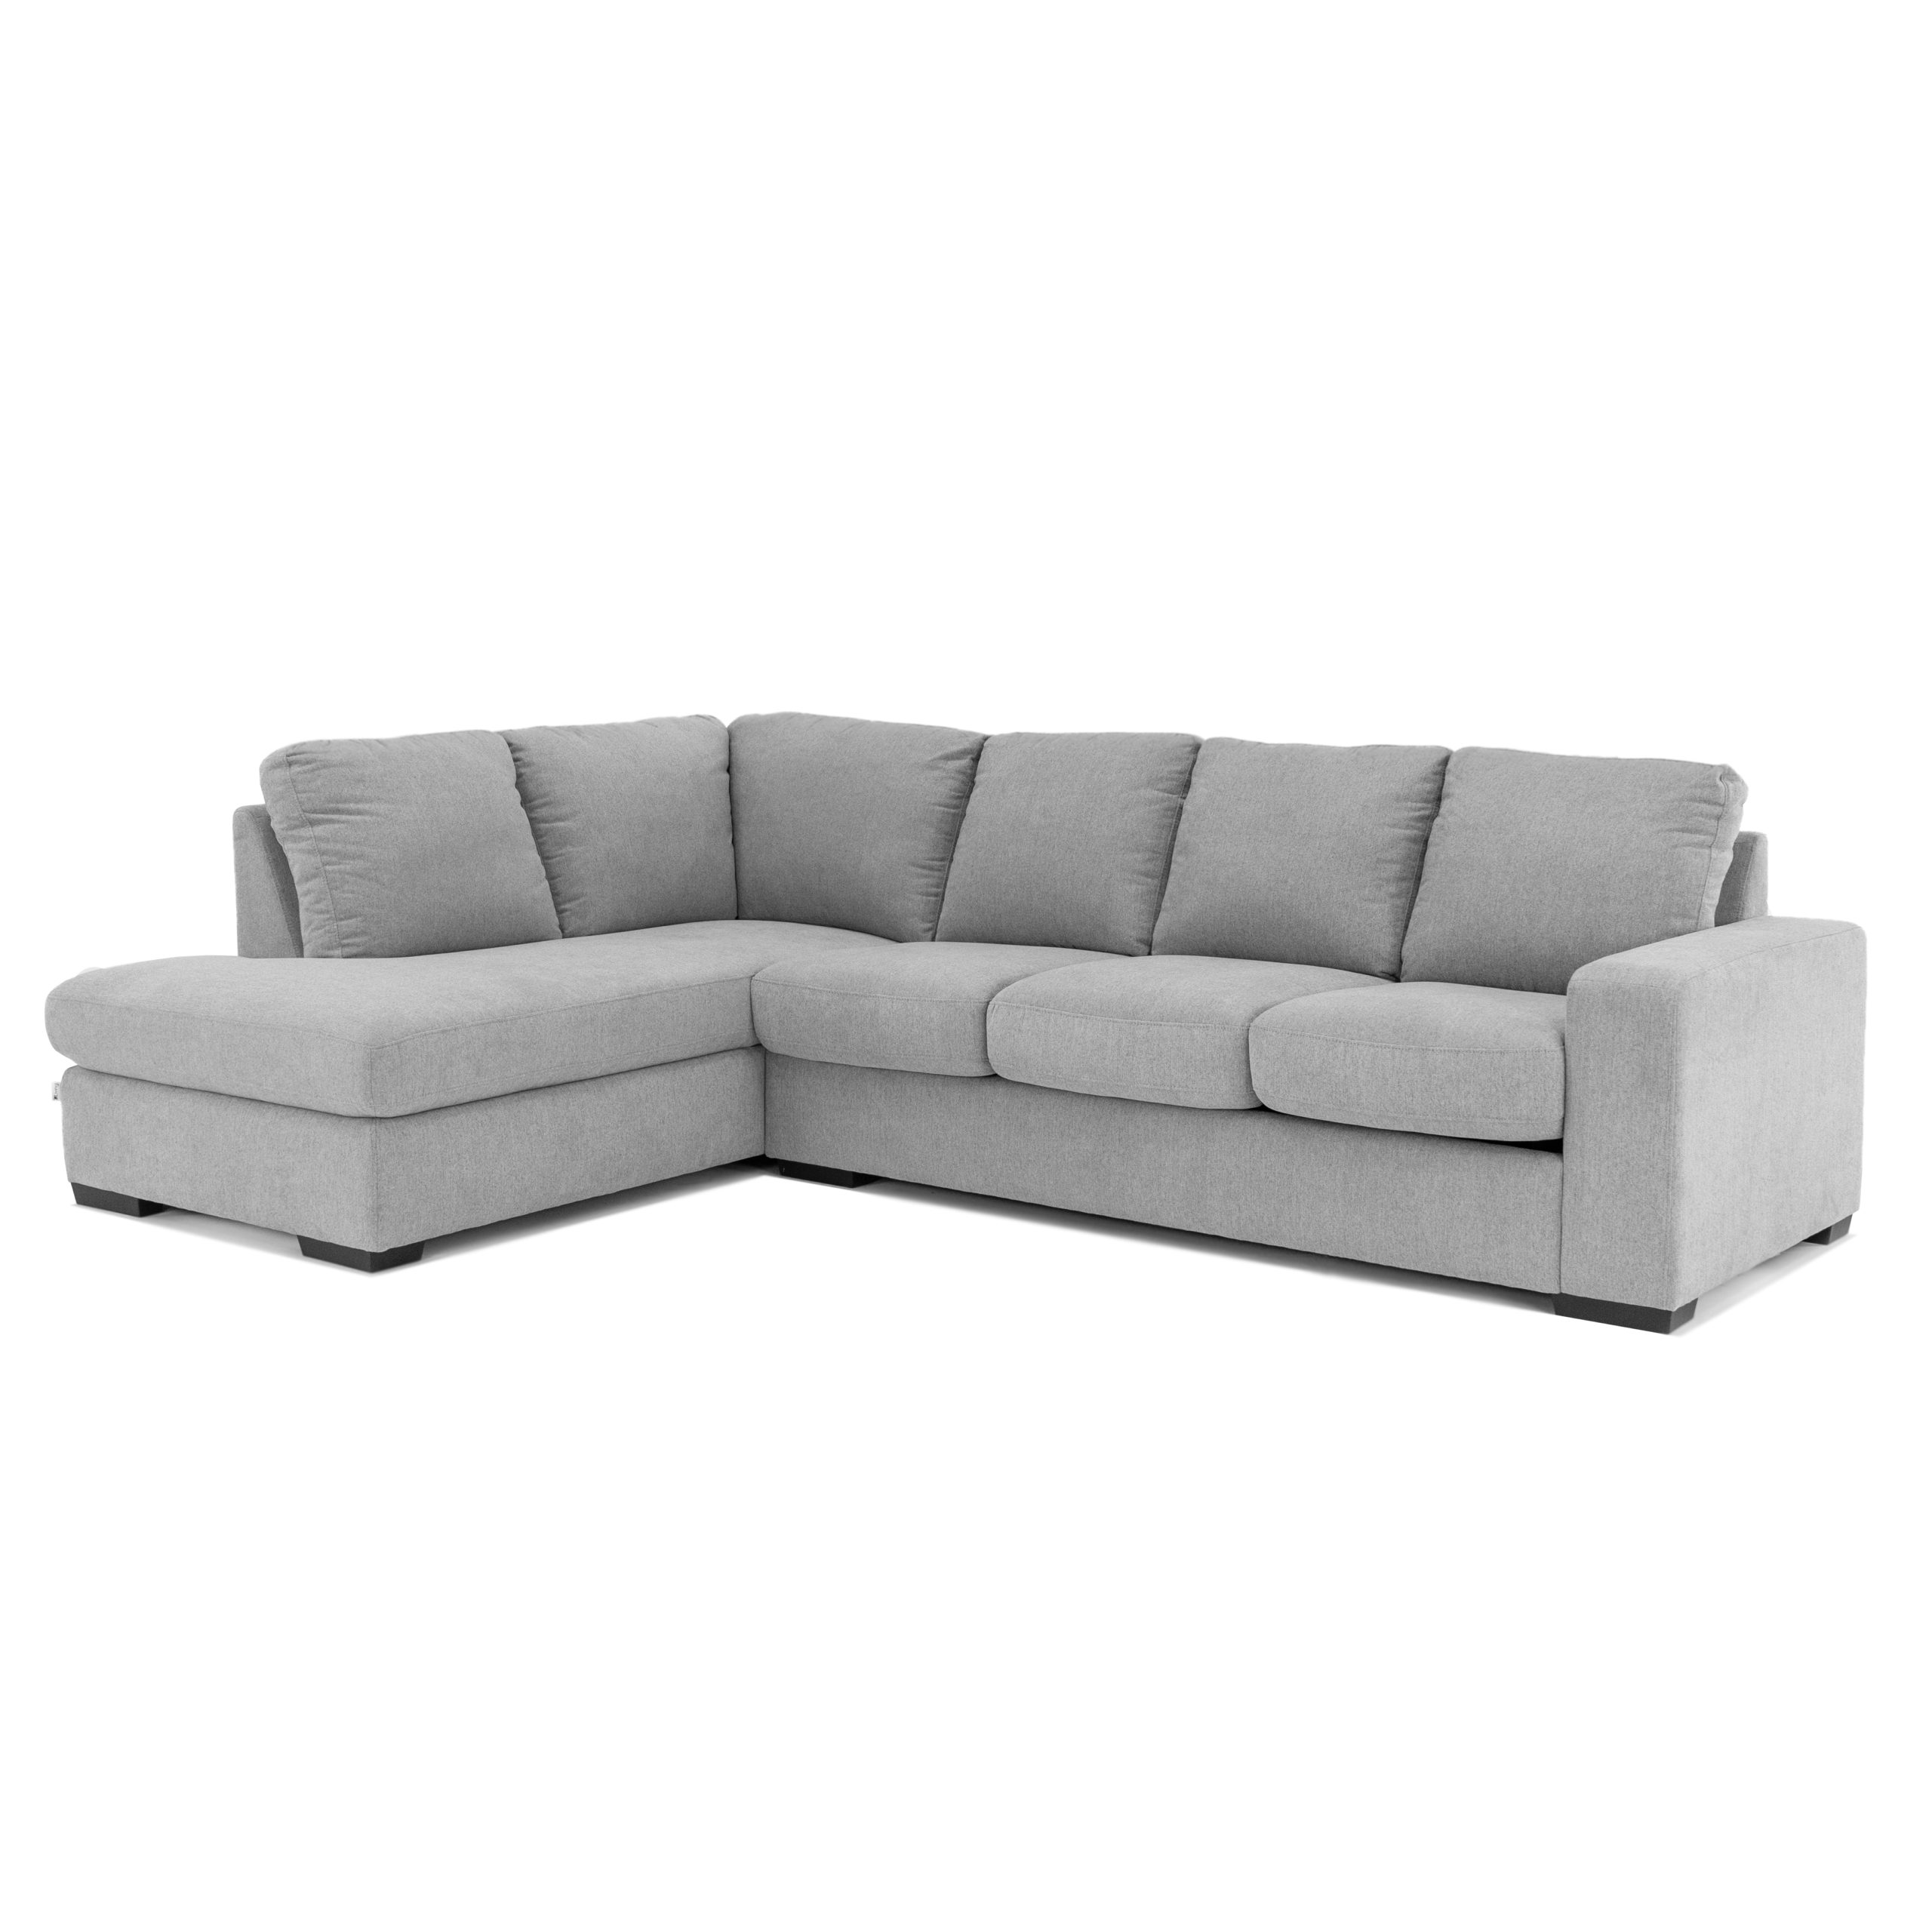 Capulet Large Sectional